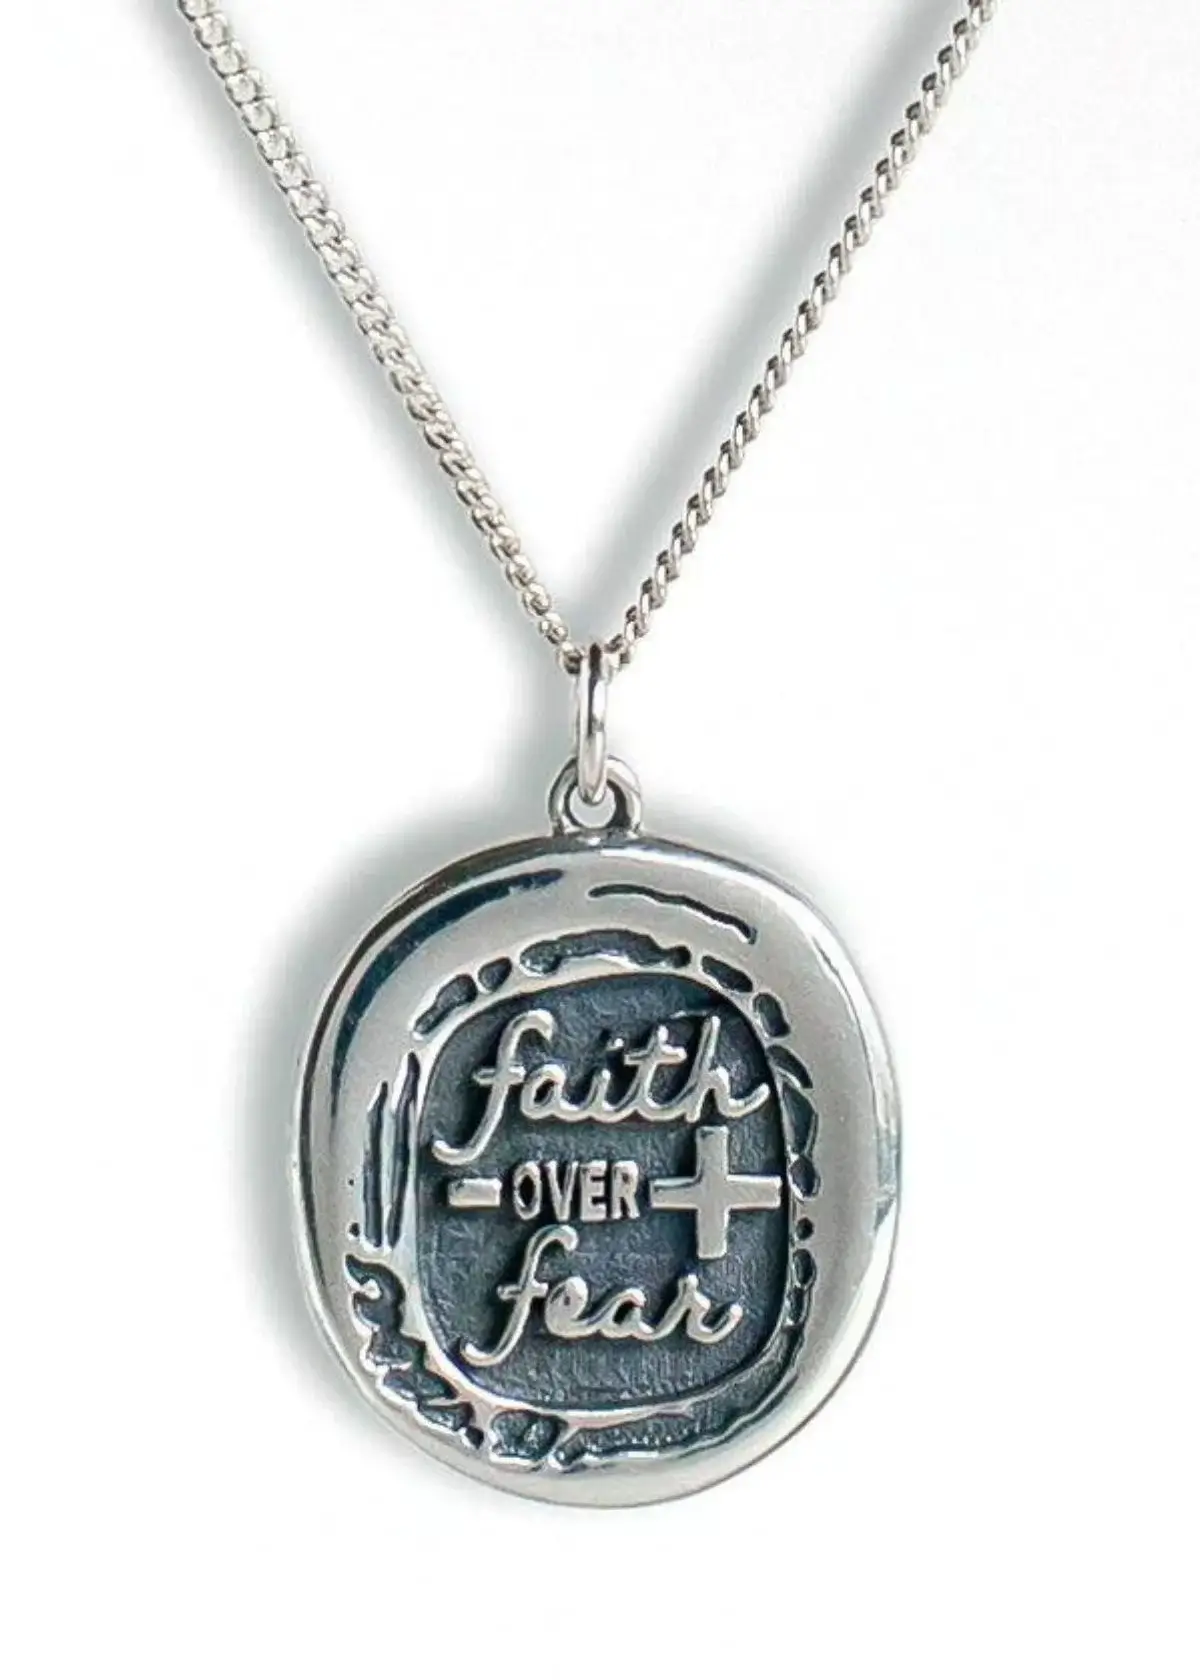 What is a faith over fear necklace?